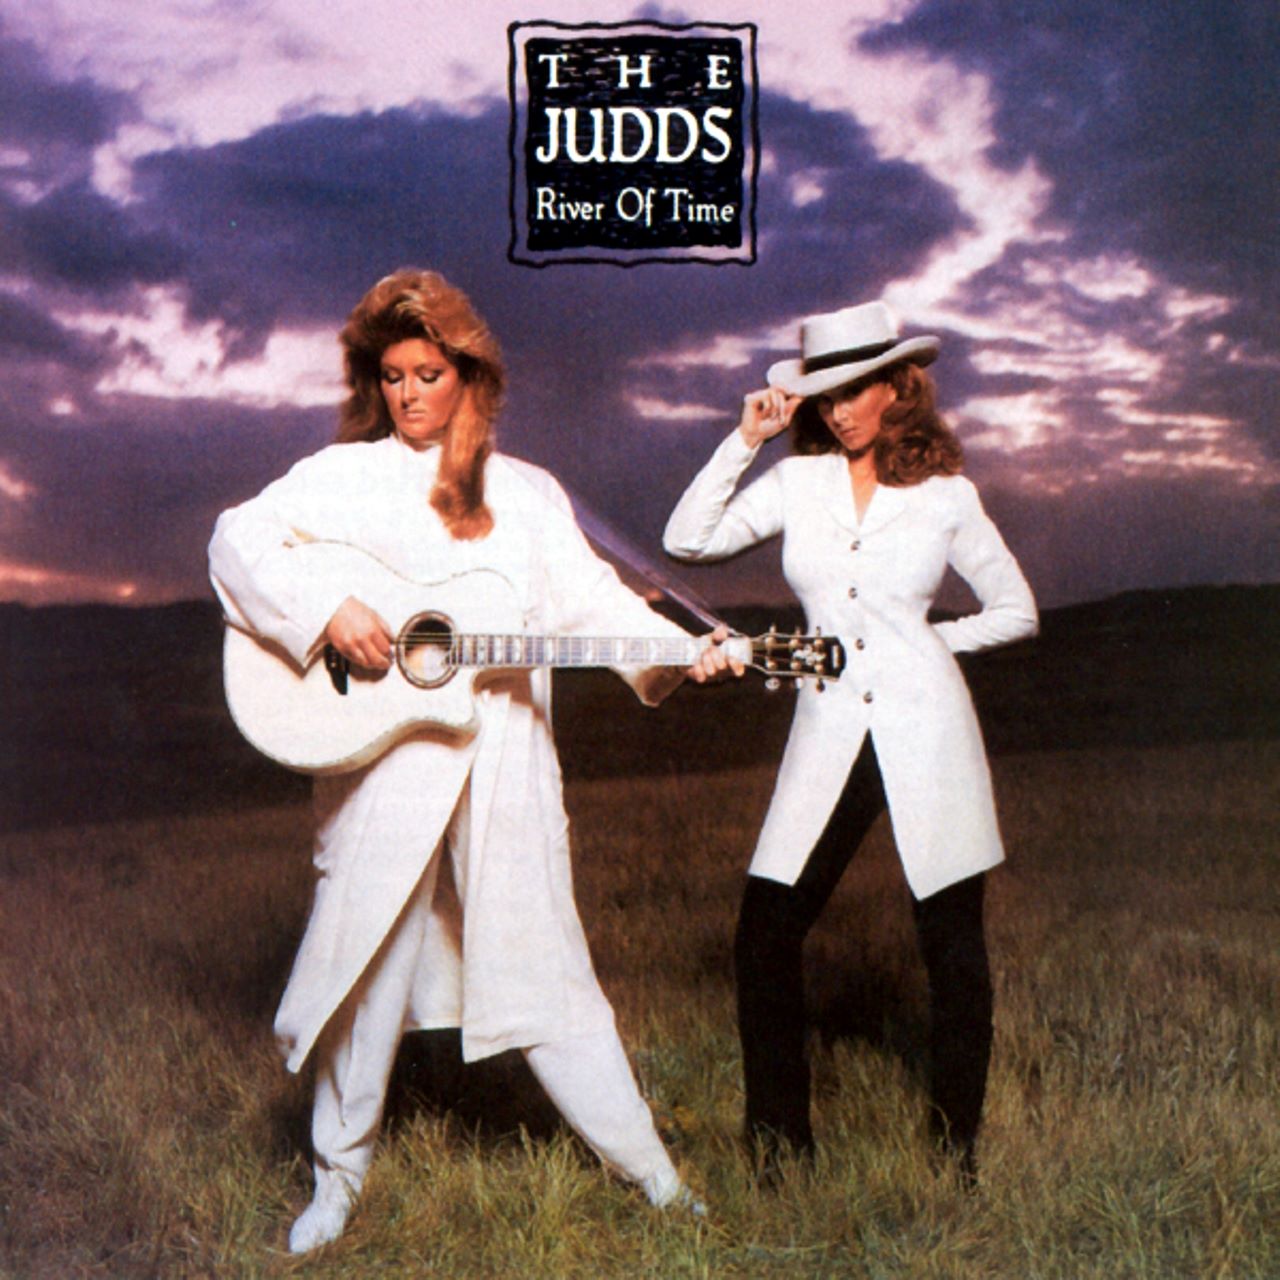 Judds – River Of Time cover album